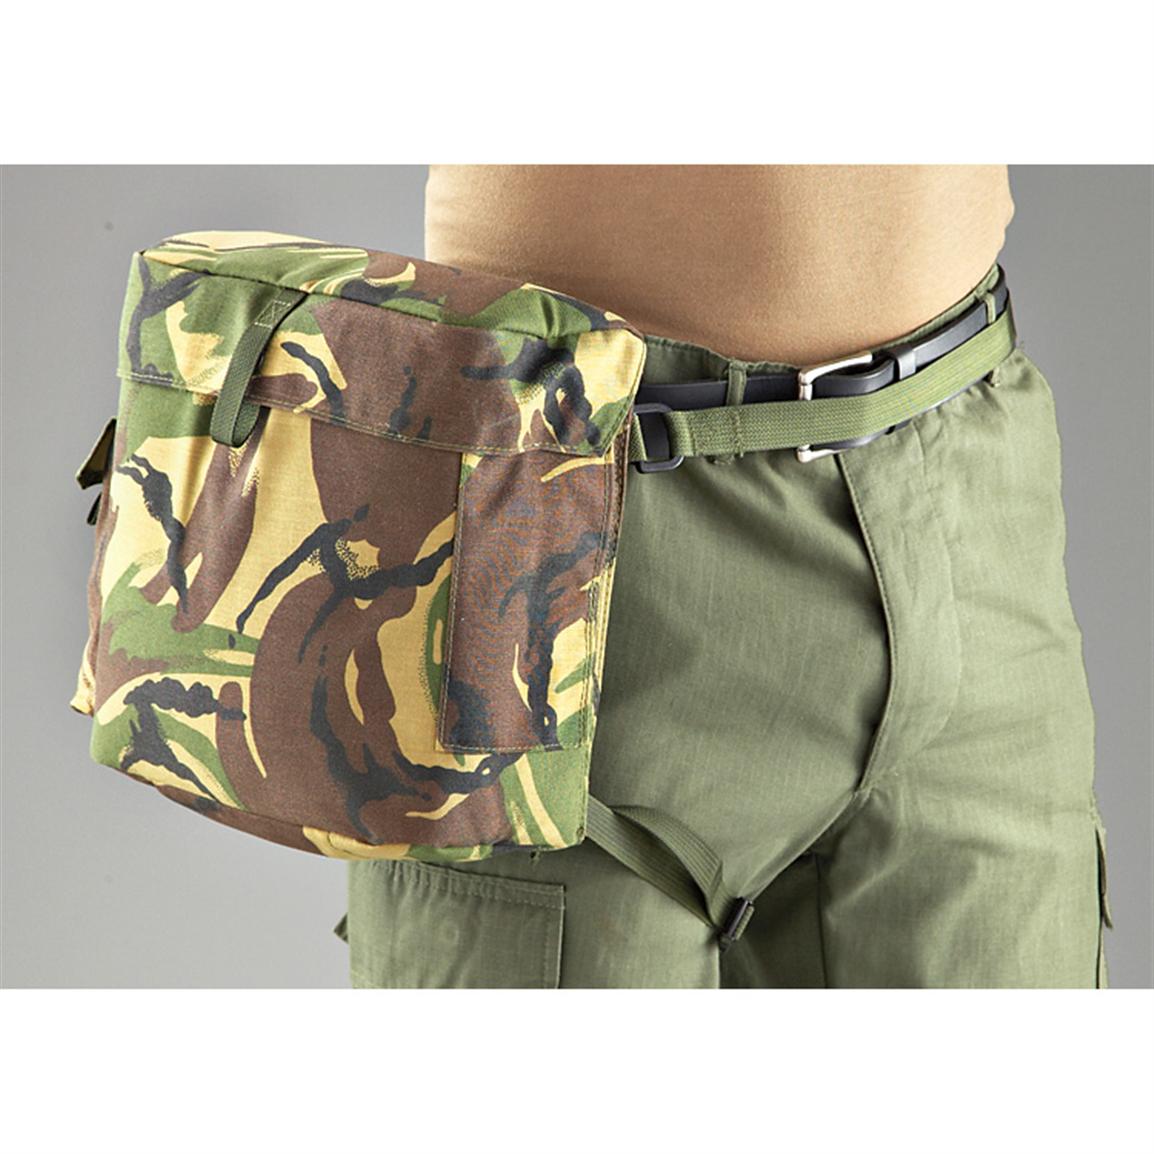 New British Military Surplus Musette Bag, DPM Camo - 221965, Military Equipment Bags at ...